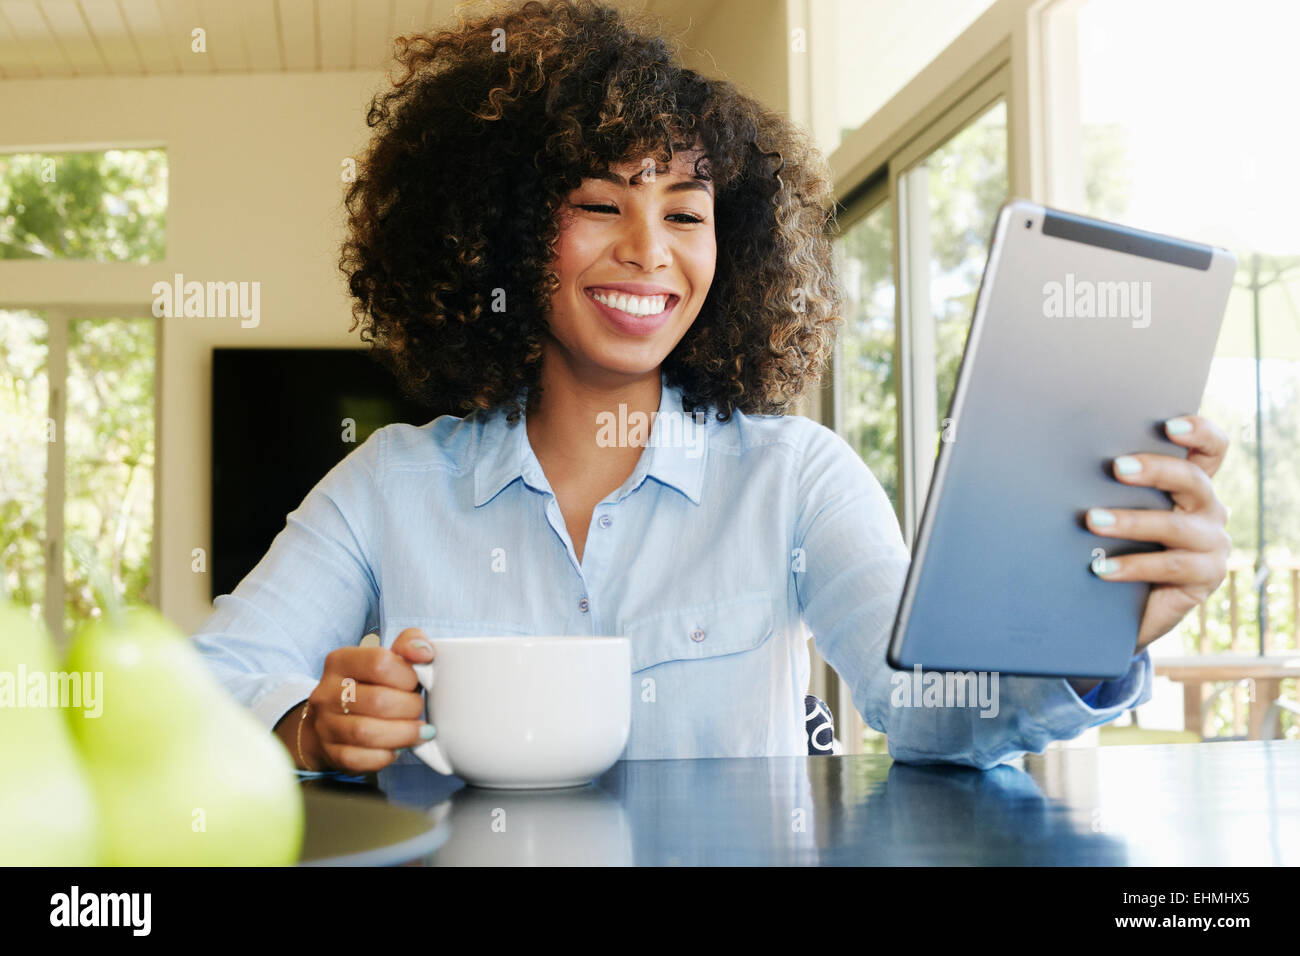 Mixed race businesswoman using digital tablet at table Stock Photo